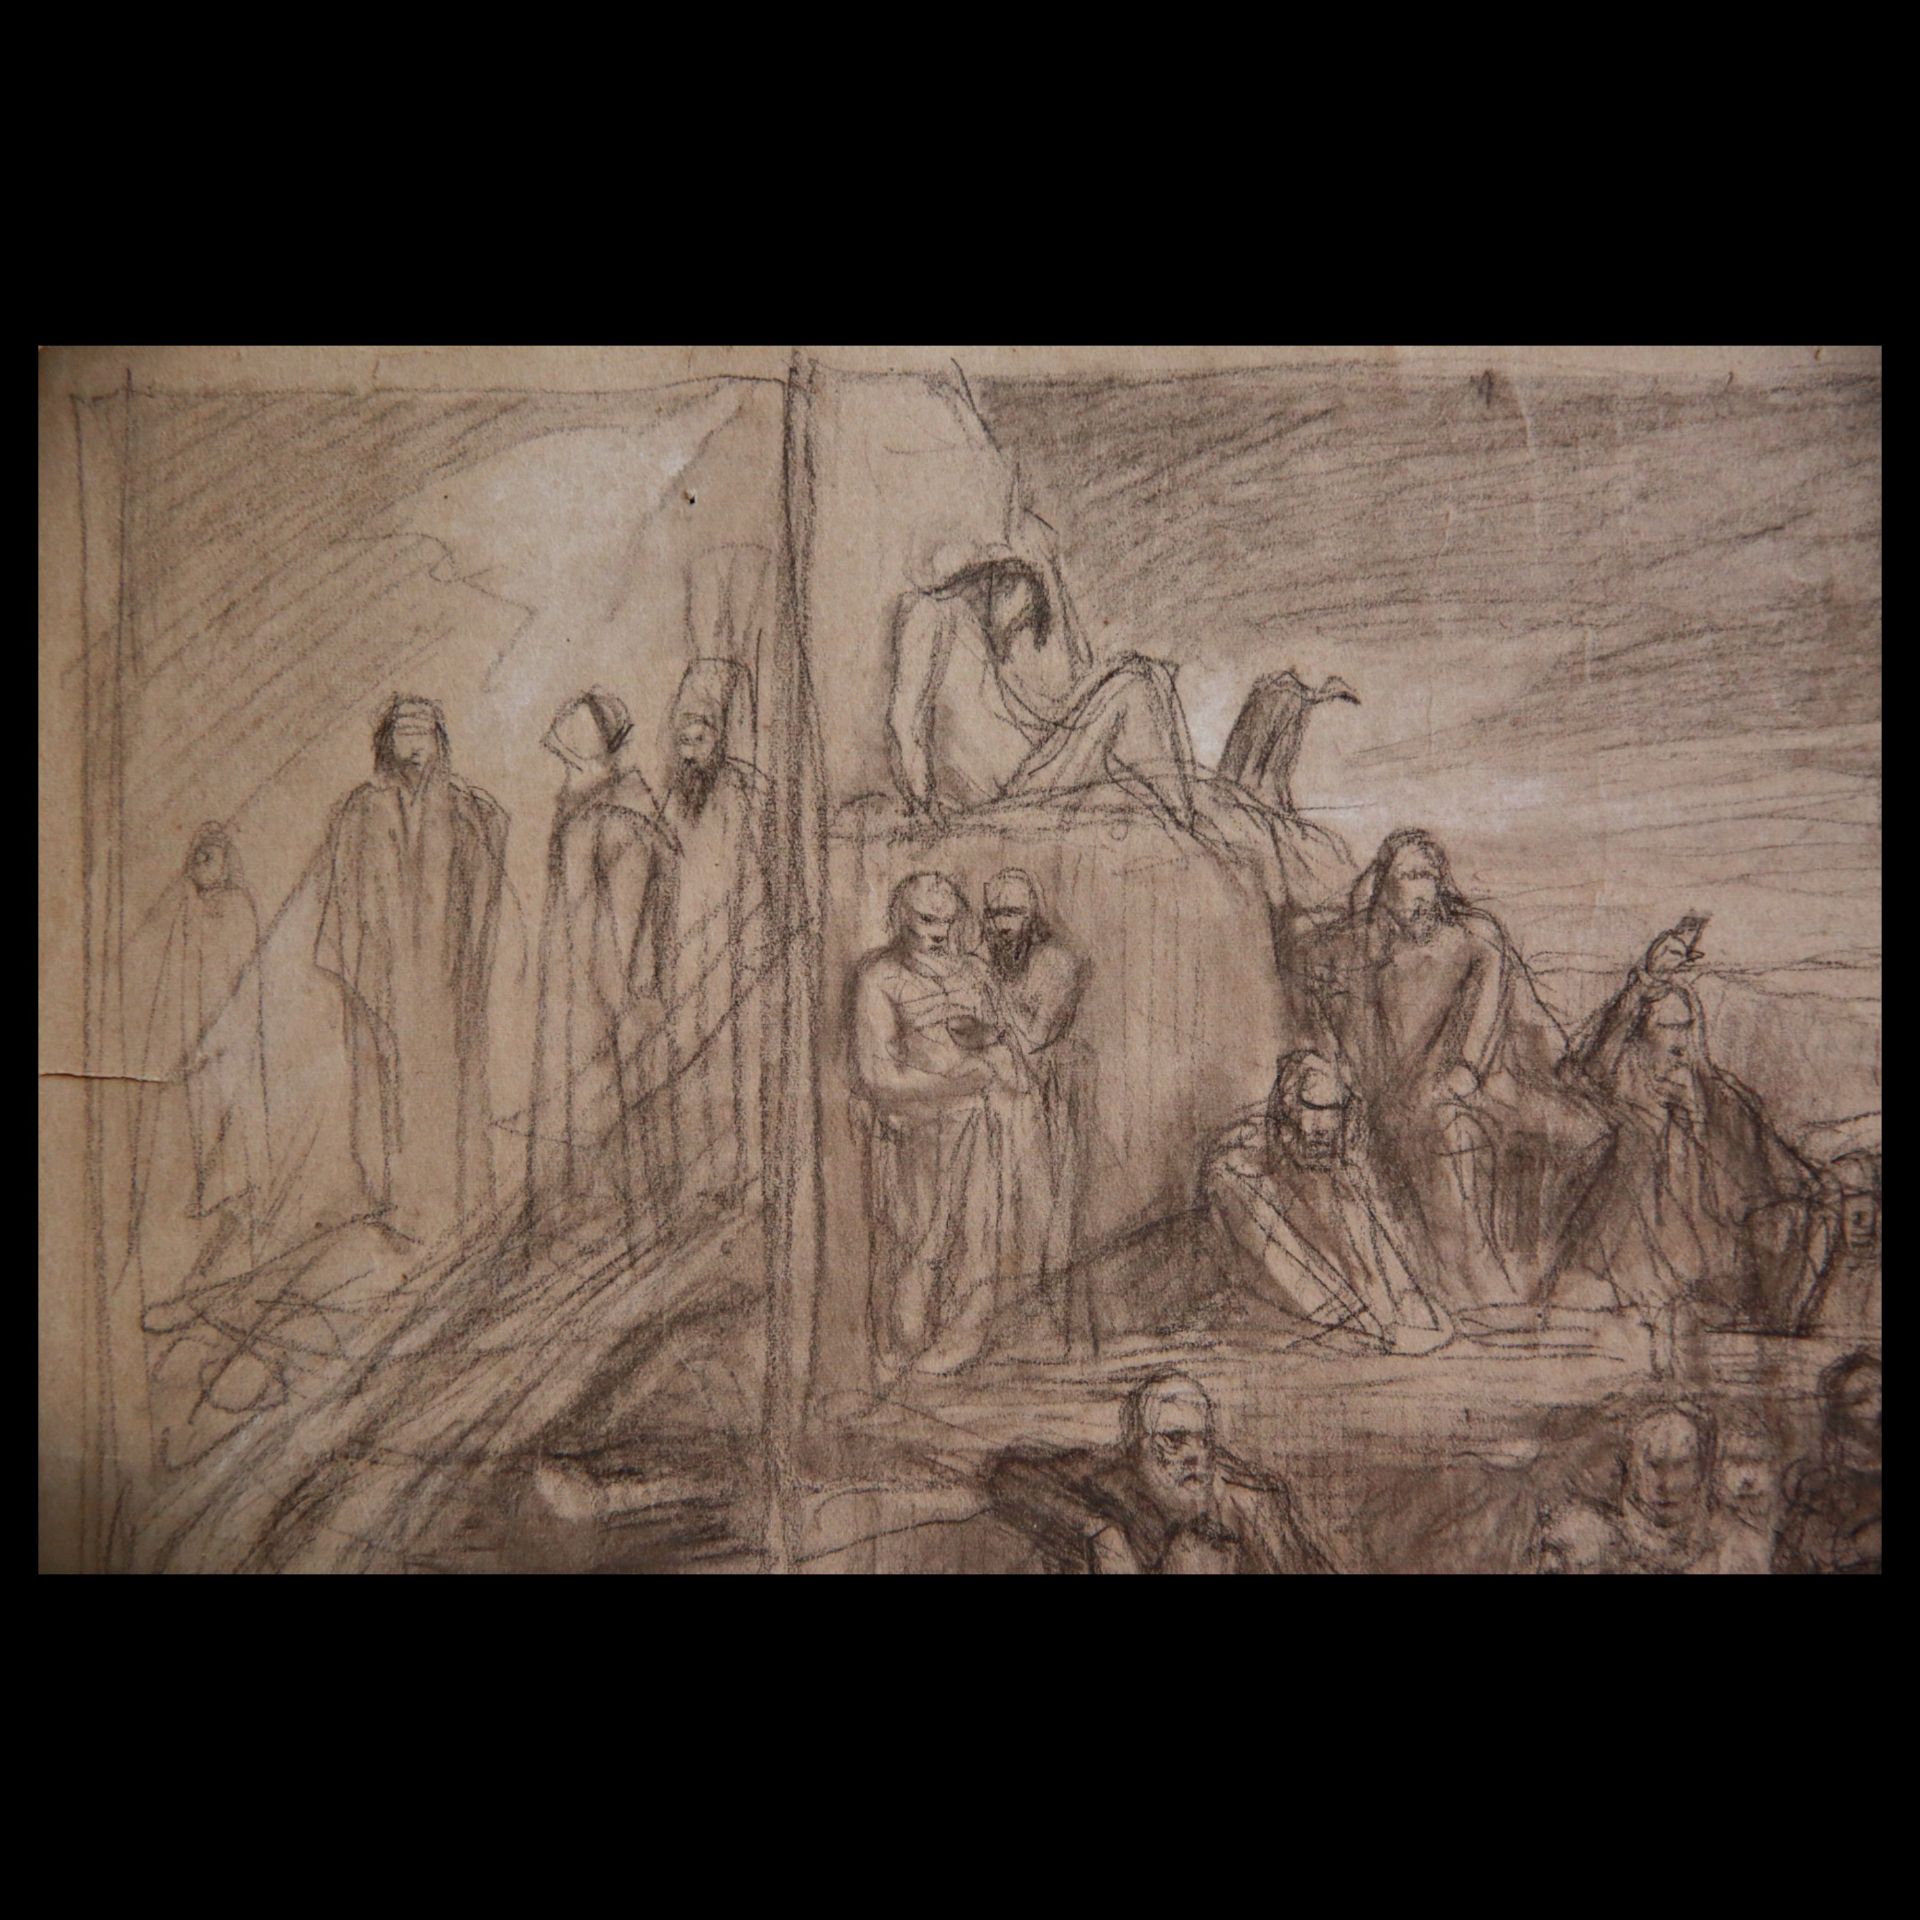 Jan STYKA (1858-1925) drawing on a biblical theme, Pencil on paper, author signature,1909. - Image 6 of 7